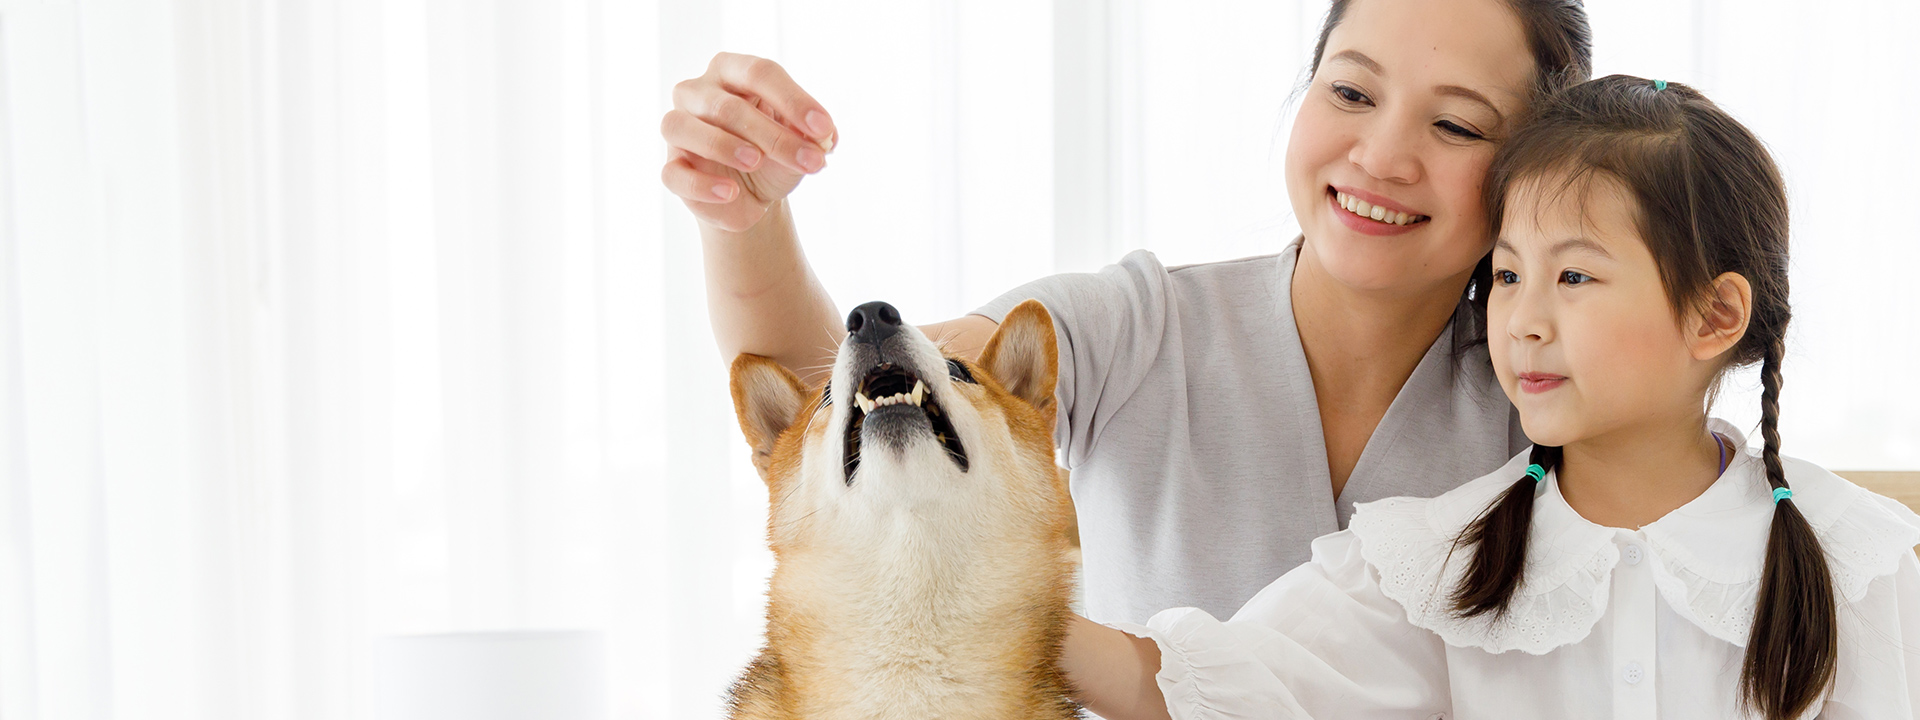 Pet food market trends in APAC, insights from pet fairs